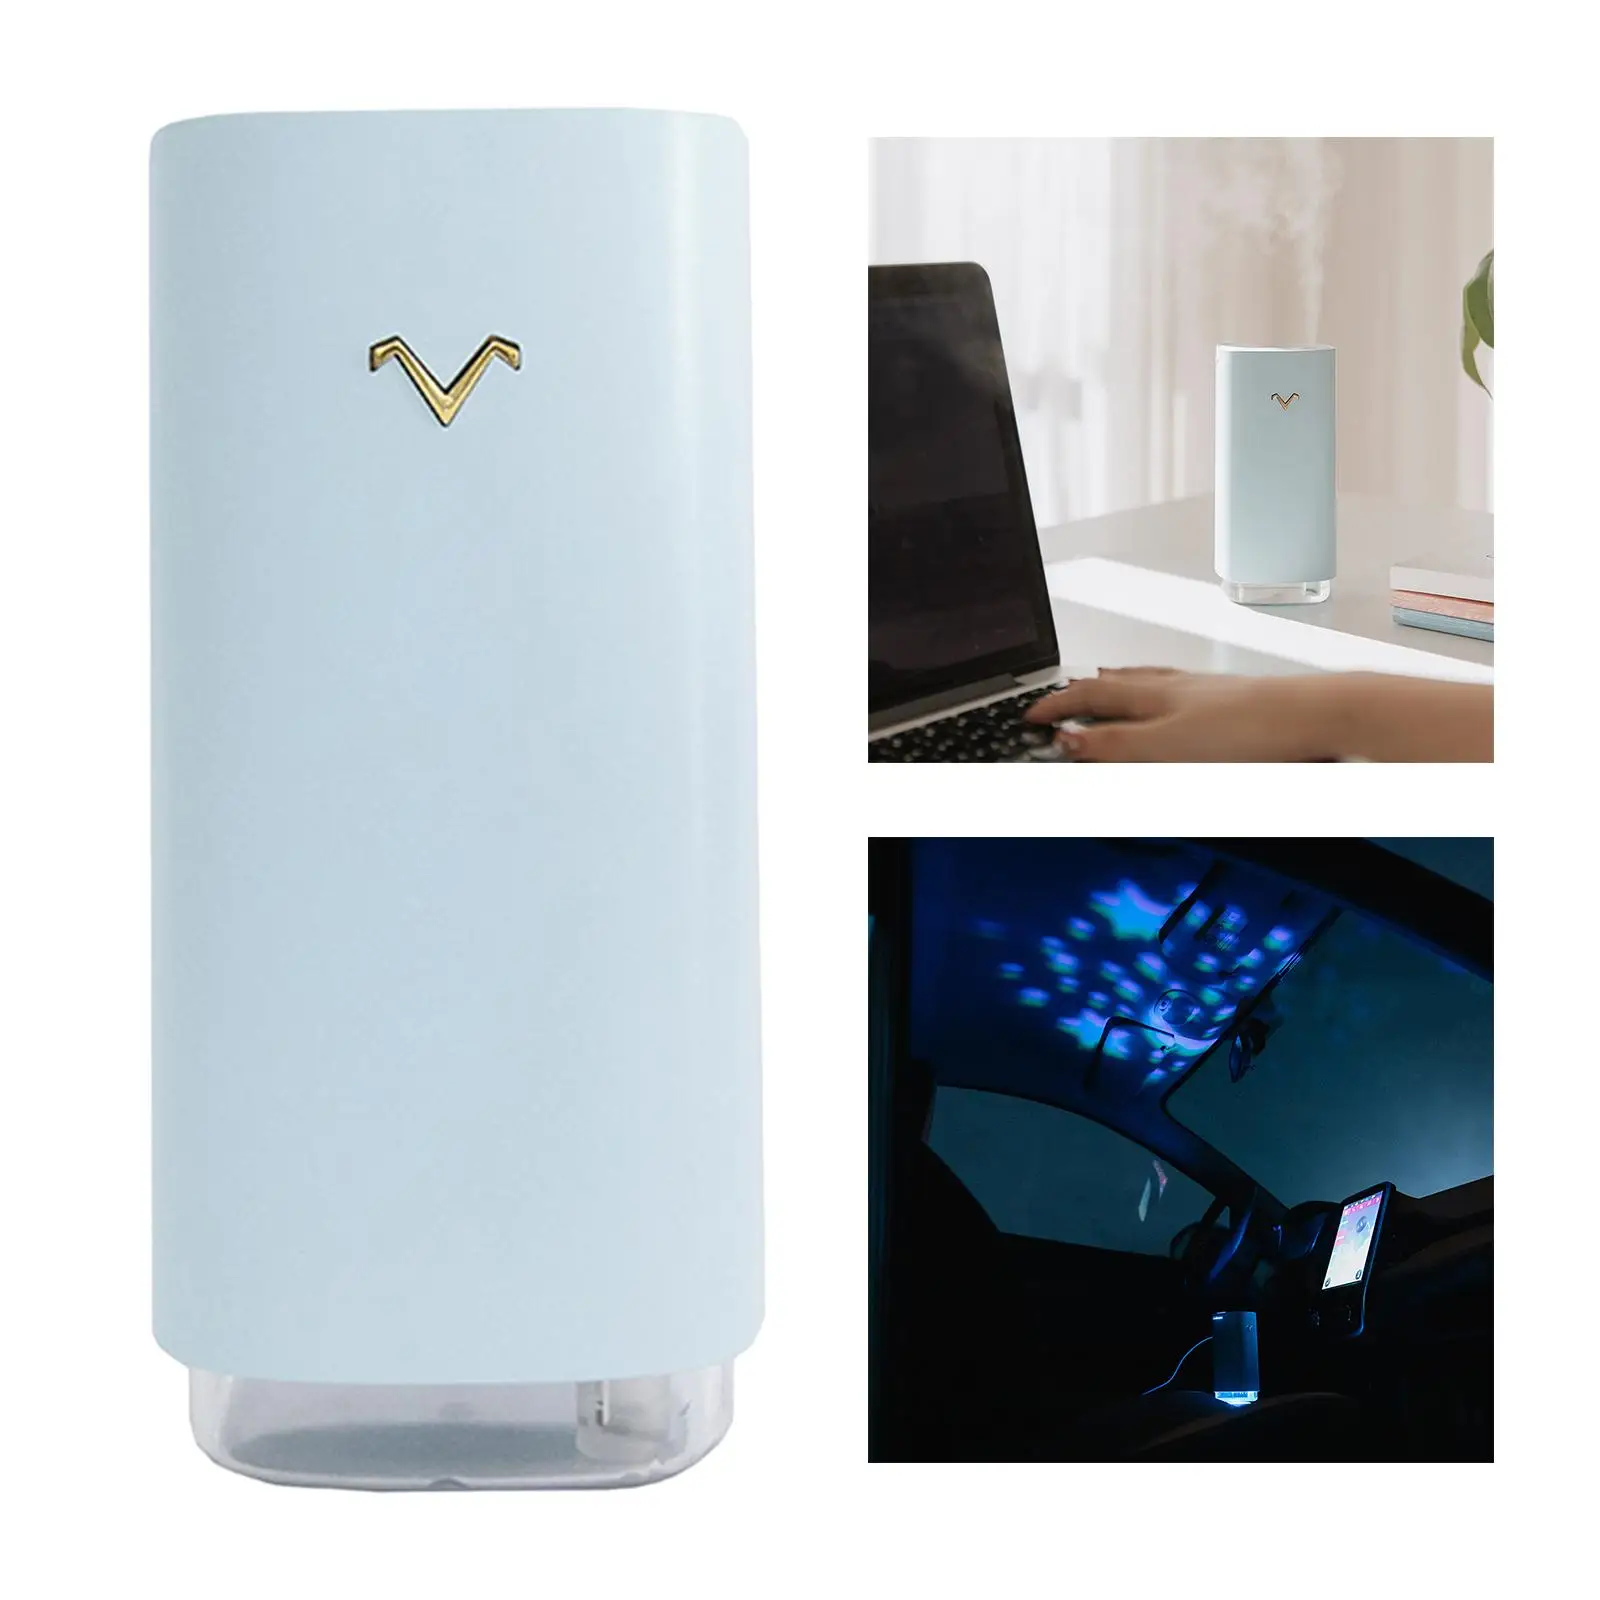 Wireless Air Humidifier with 2 Projector Slides 45ml/H Spray Volume Time Setting Auto-Off Mist Maker for Children Room Tabletop